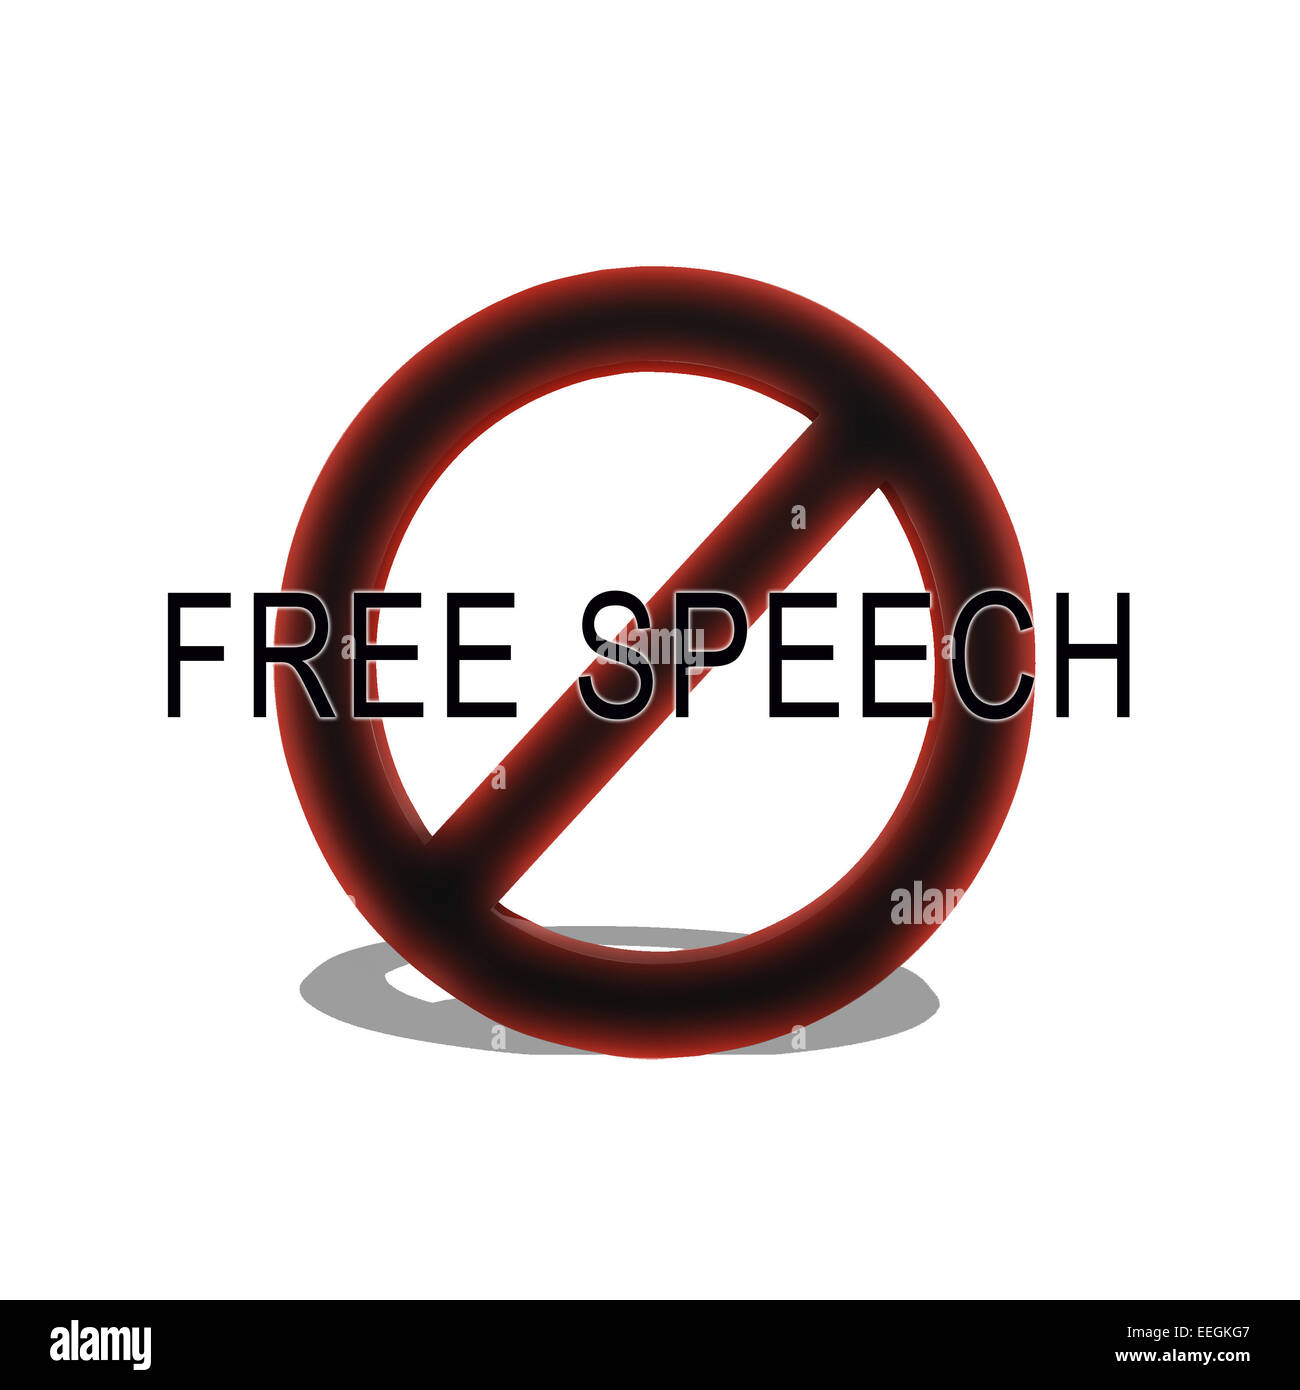 3d image banned free speech Stock Photo